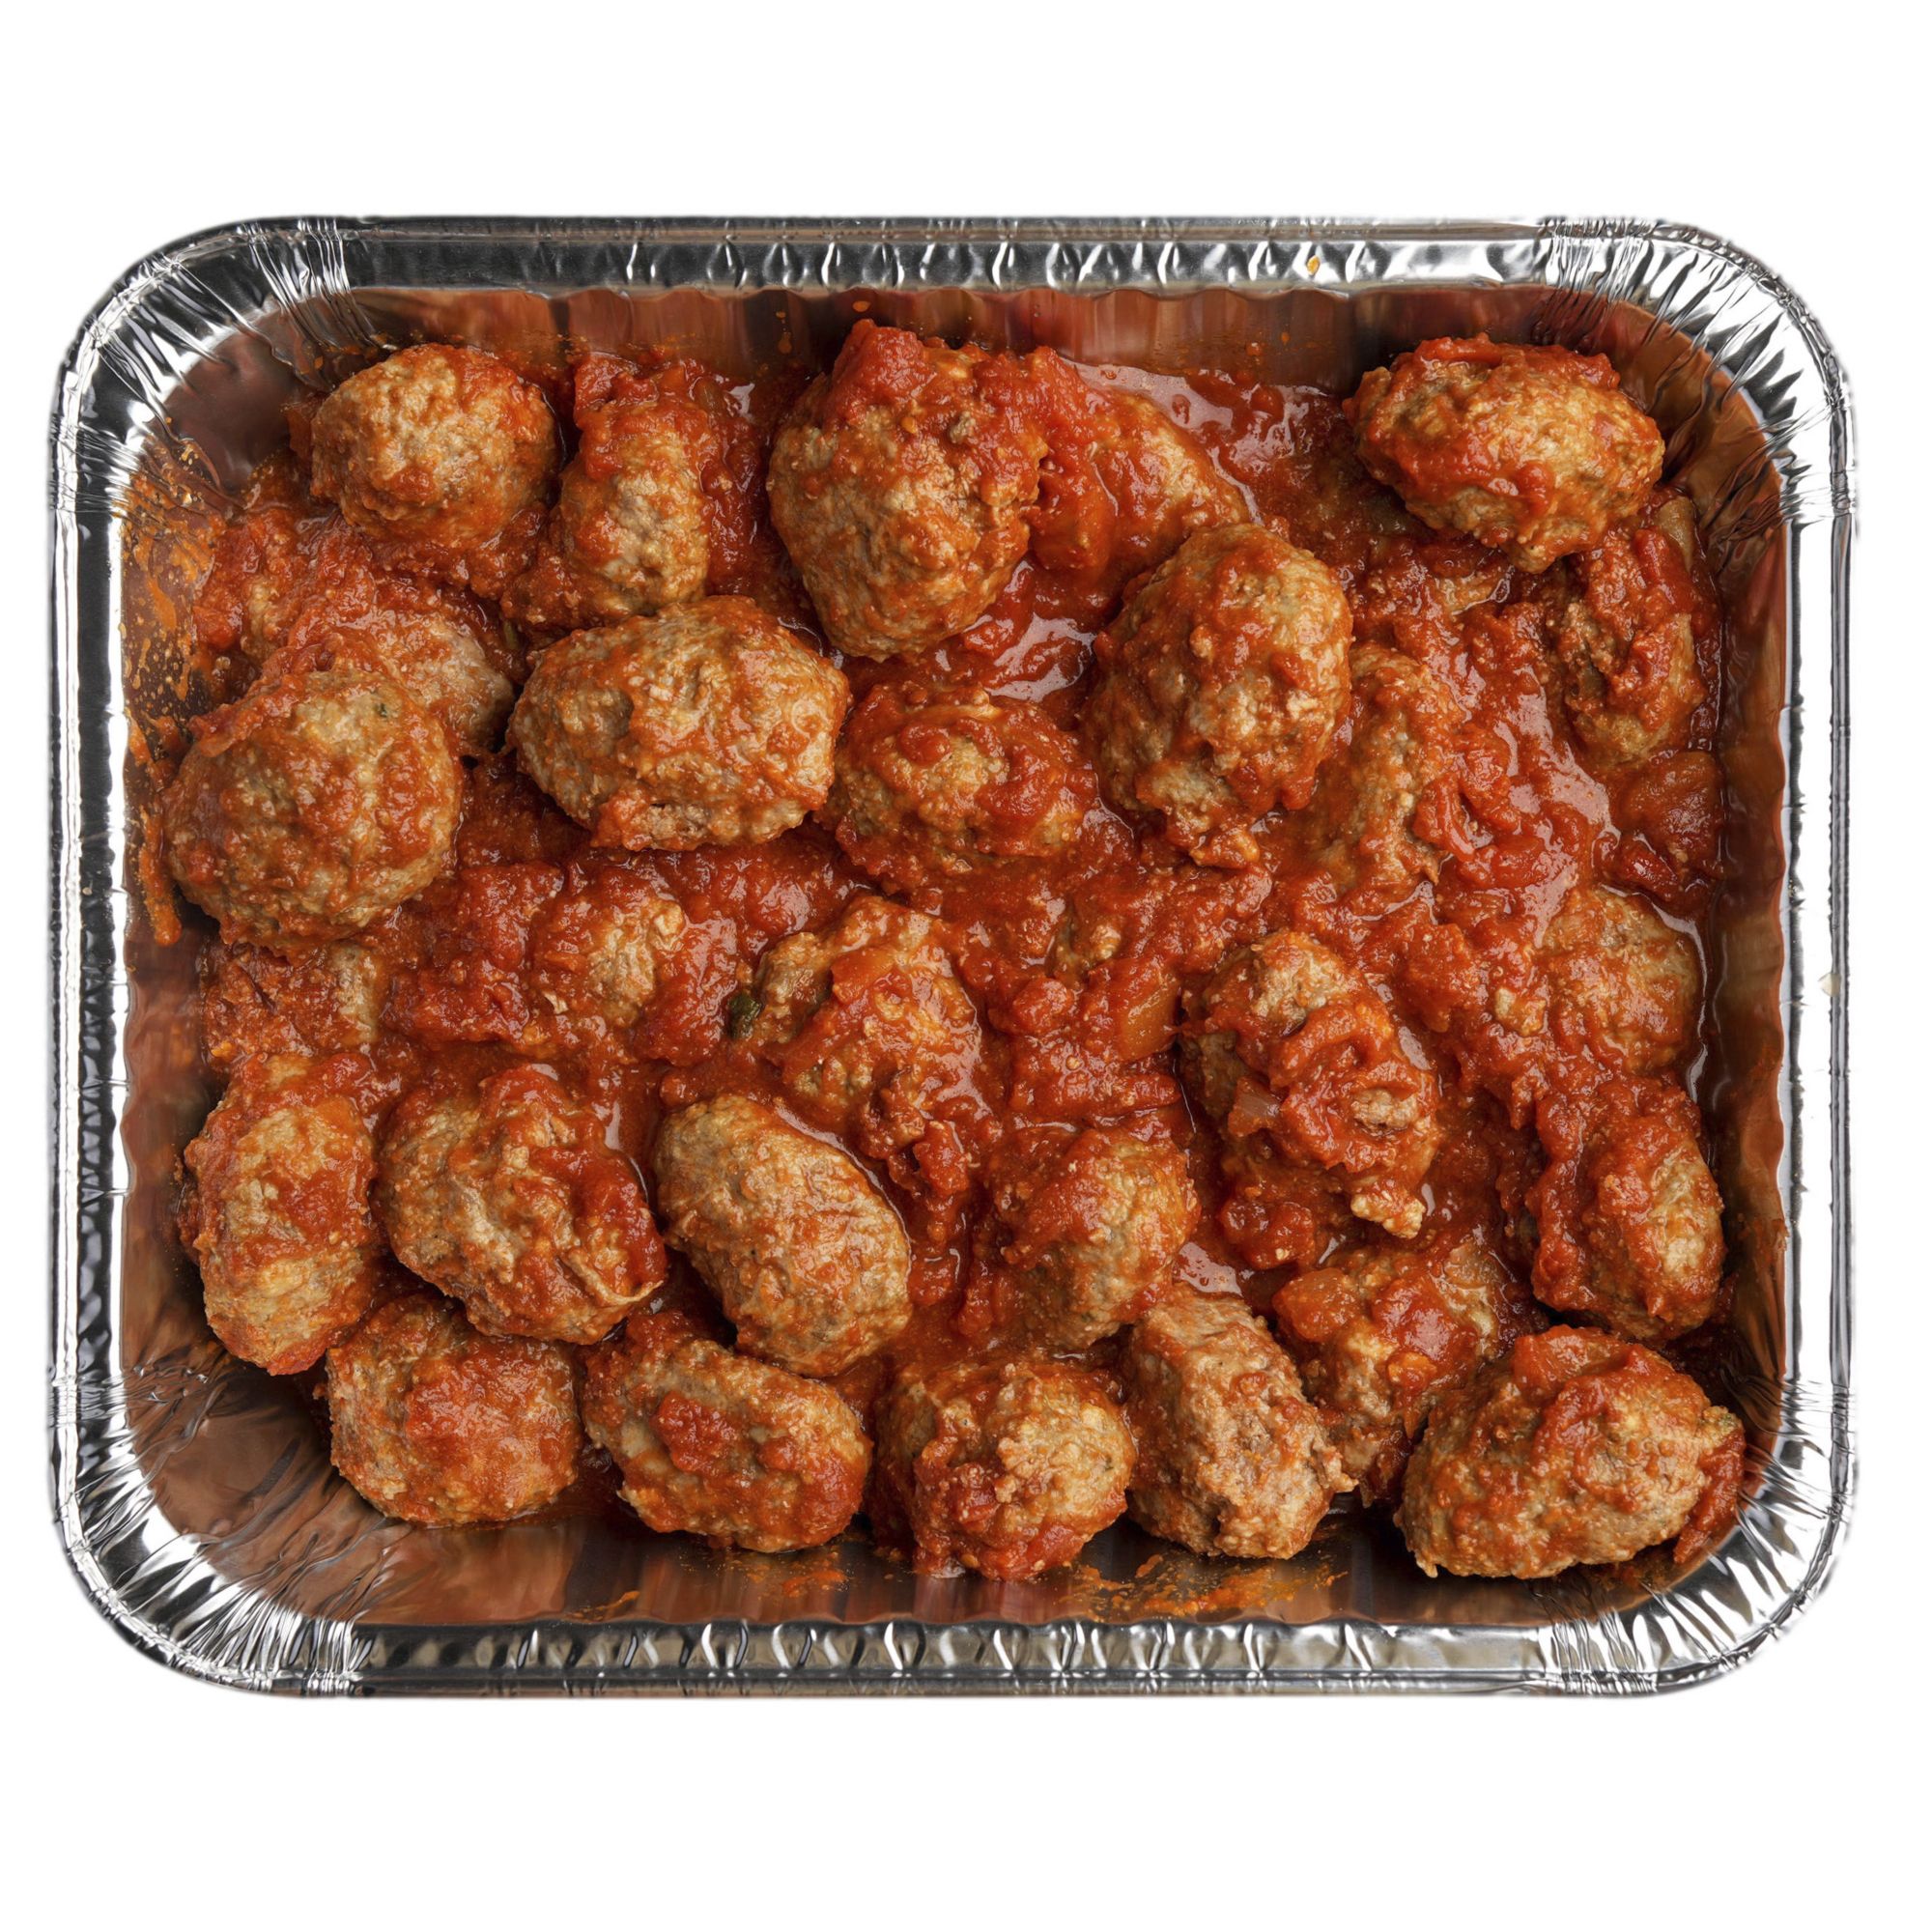 Wellsley Farms Meatballs in Pomodoro Sauce Catering Tray, 6.96-7.64 lbs.